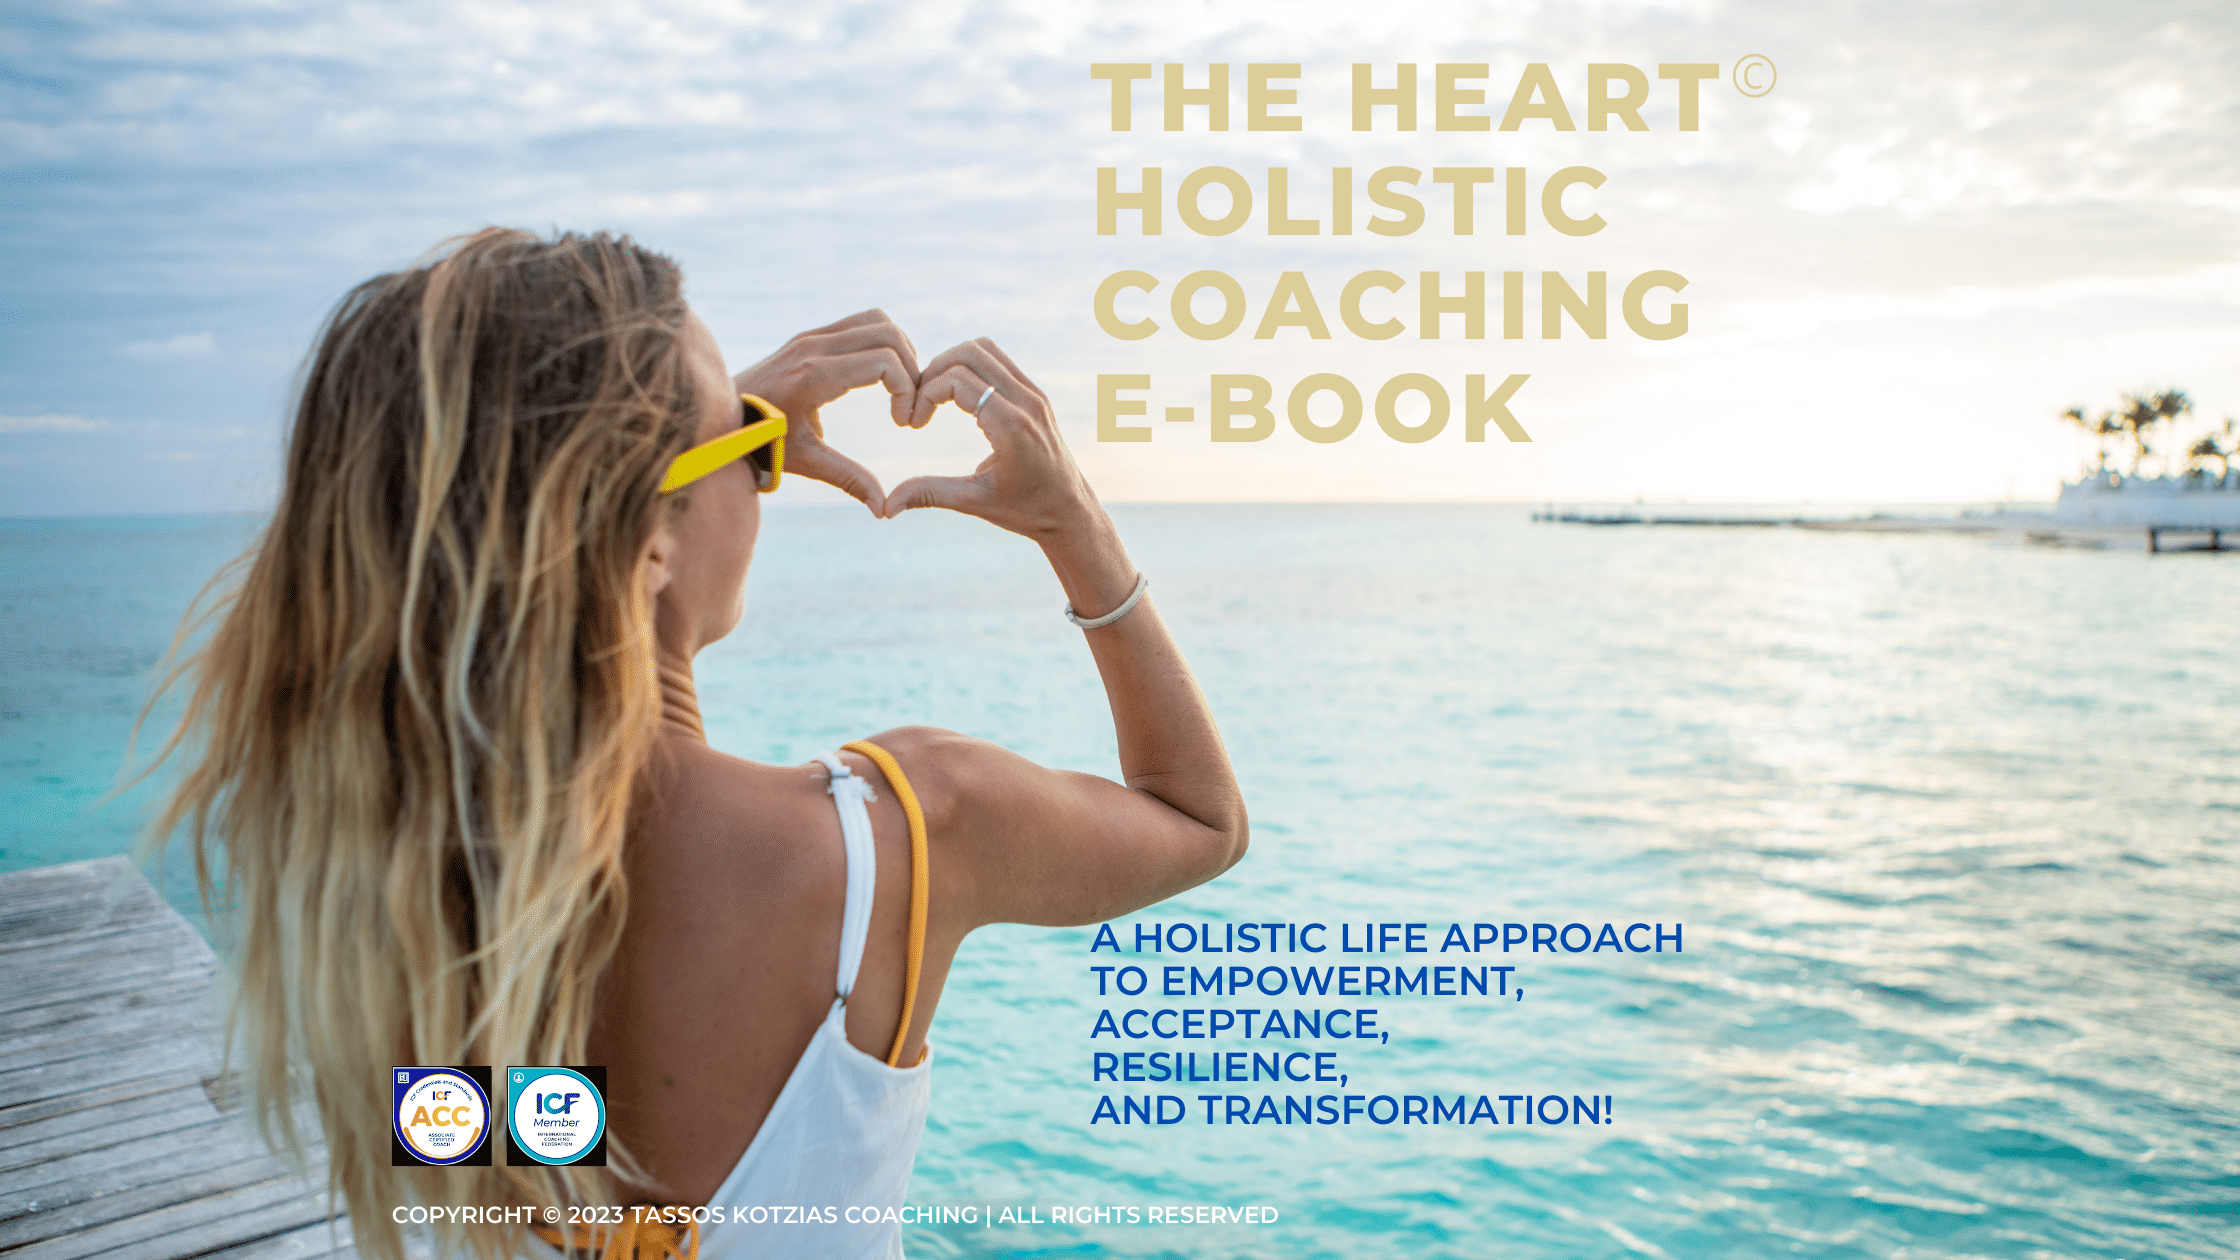 Image of a woman gazing at the sea horizon, writing: The HEART Holistic Coaching. A Holistic life Approach to Empowerment, Acceptance, Resilience, and Transformation!